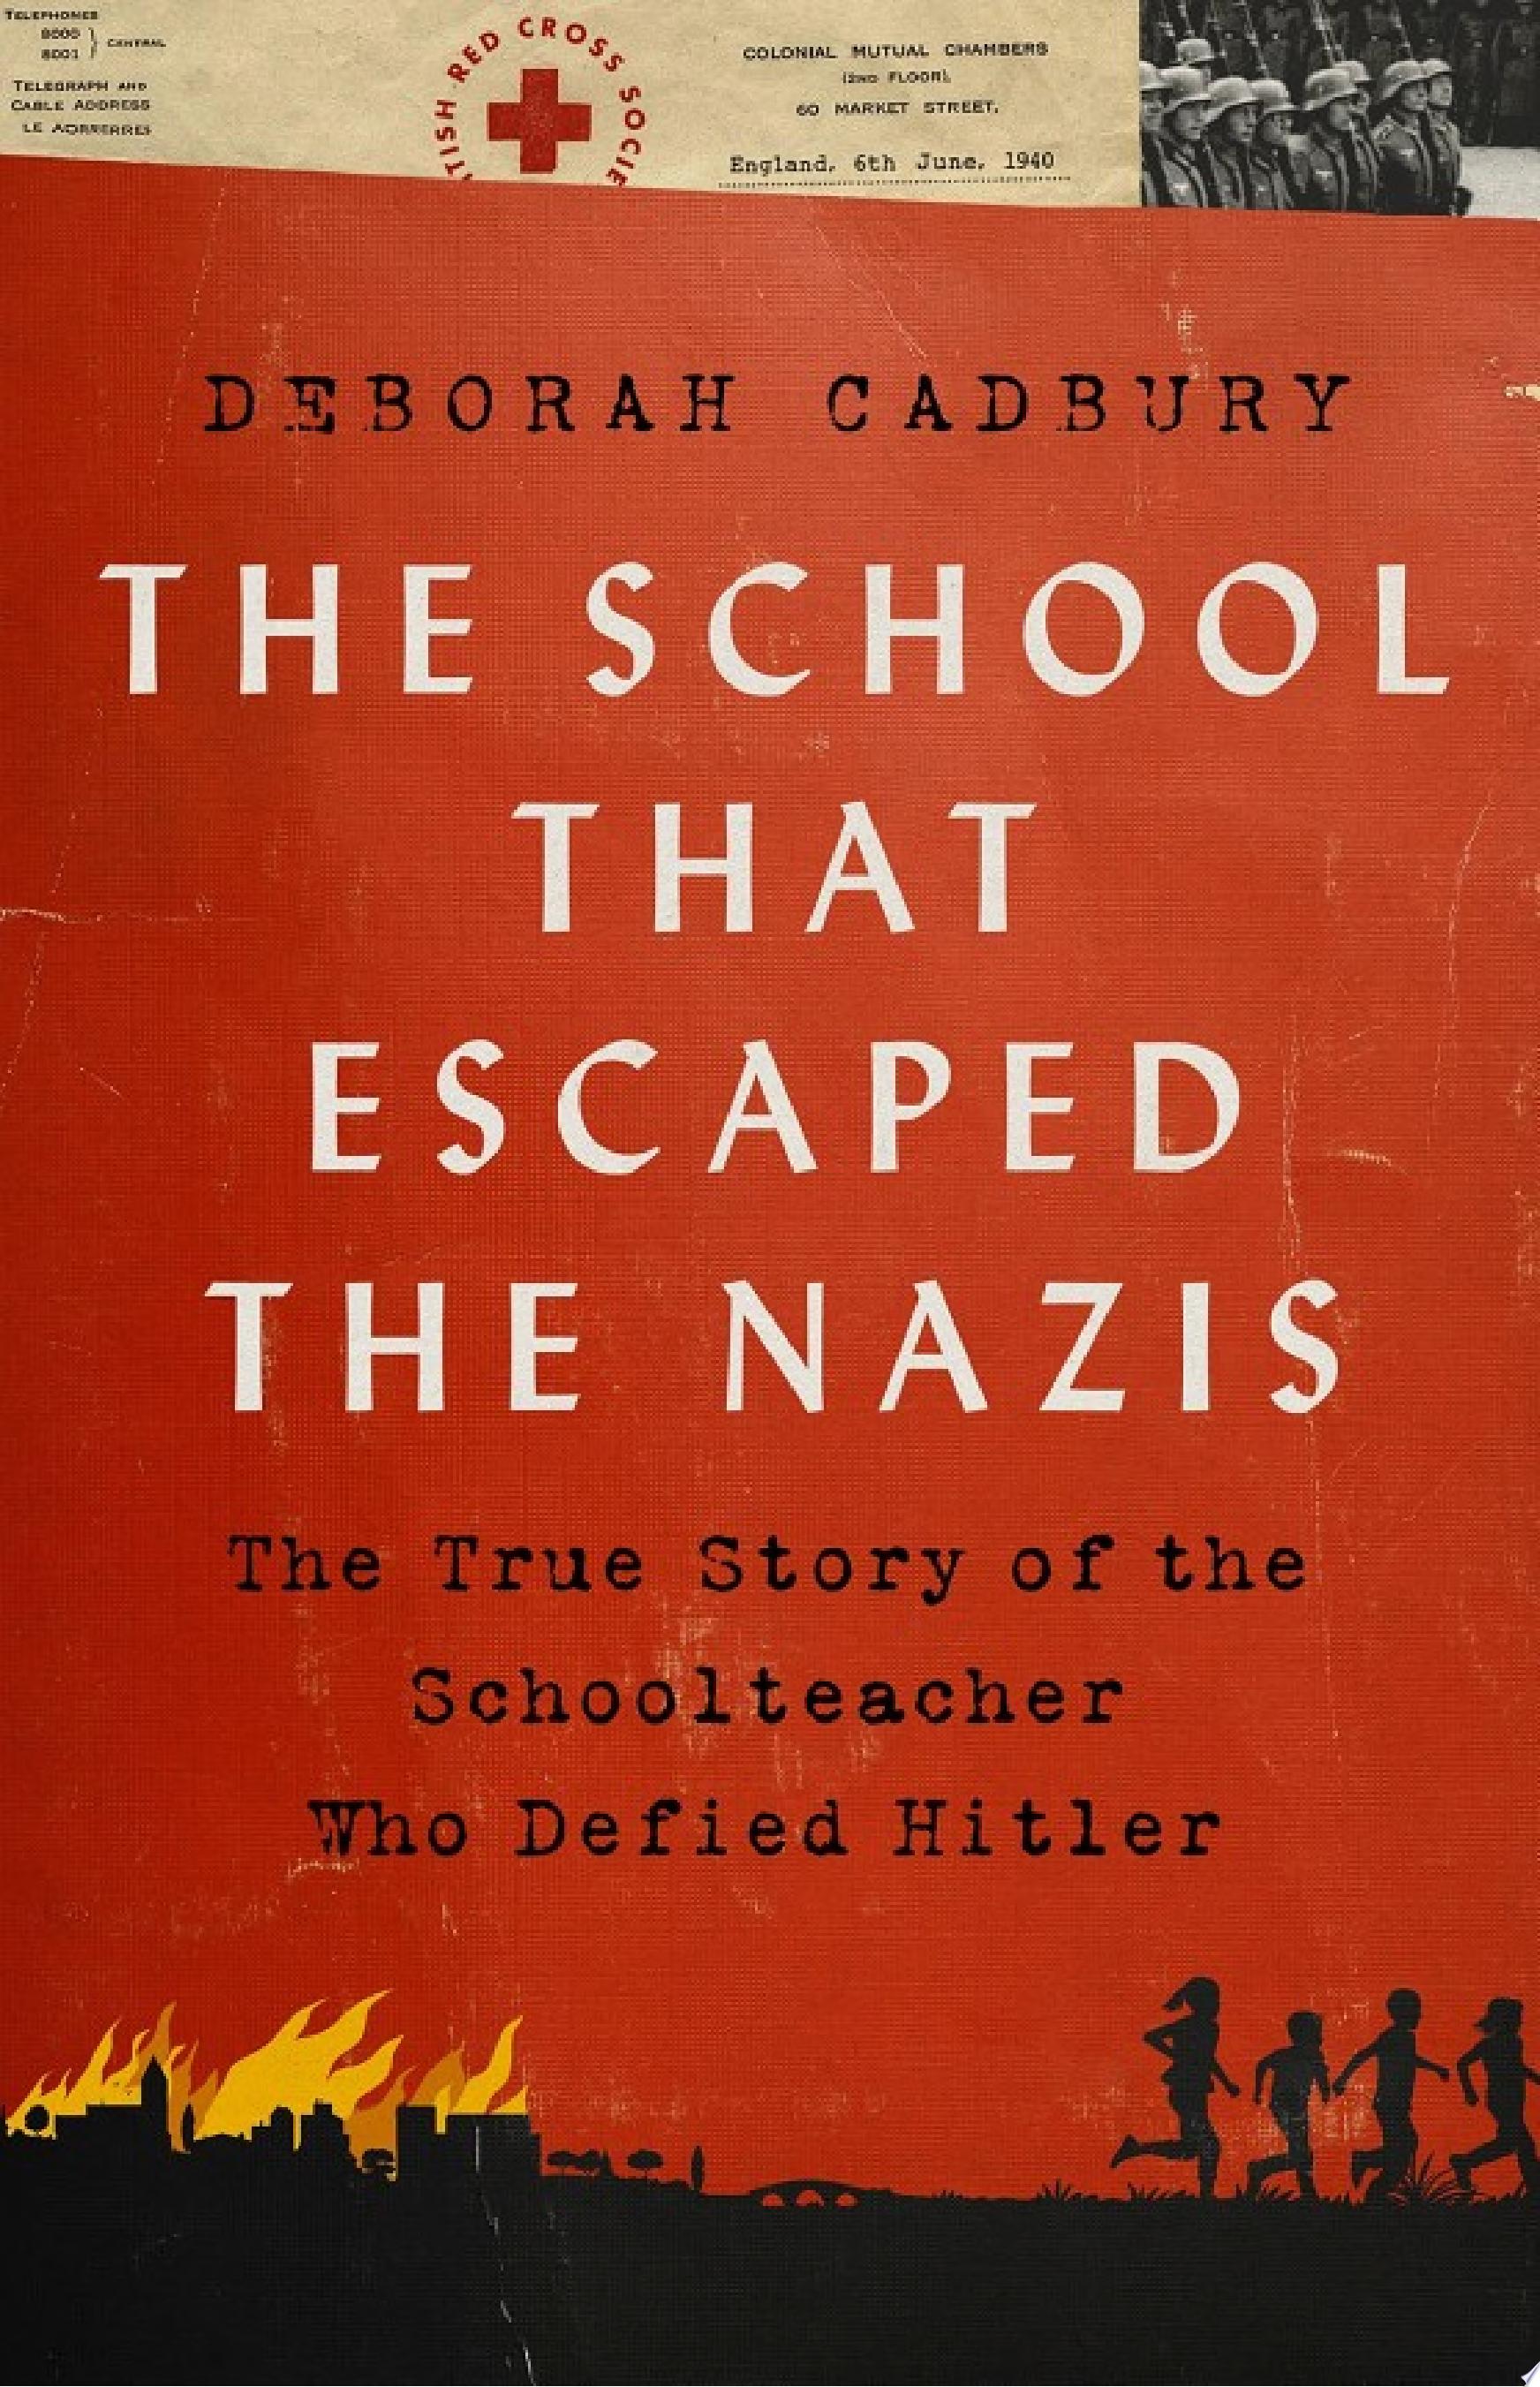 Image for "The School that Escaped the Nazis"